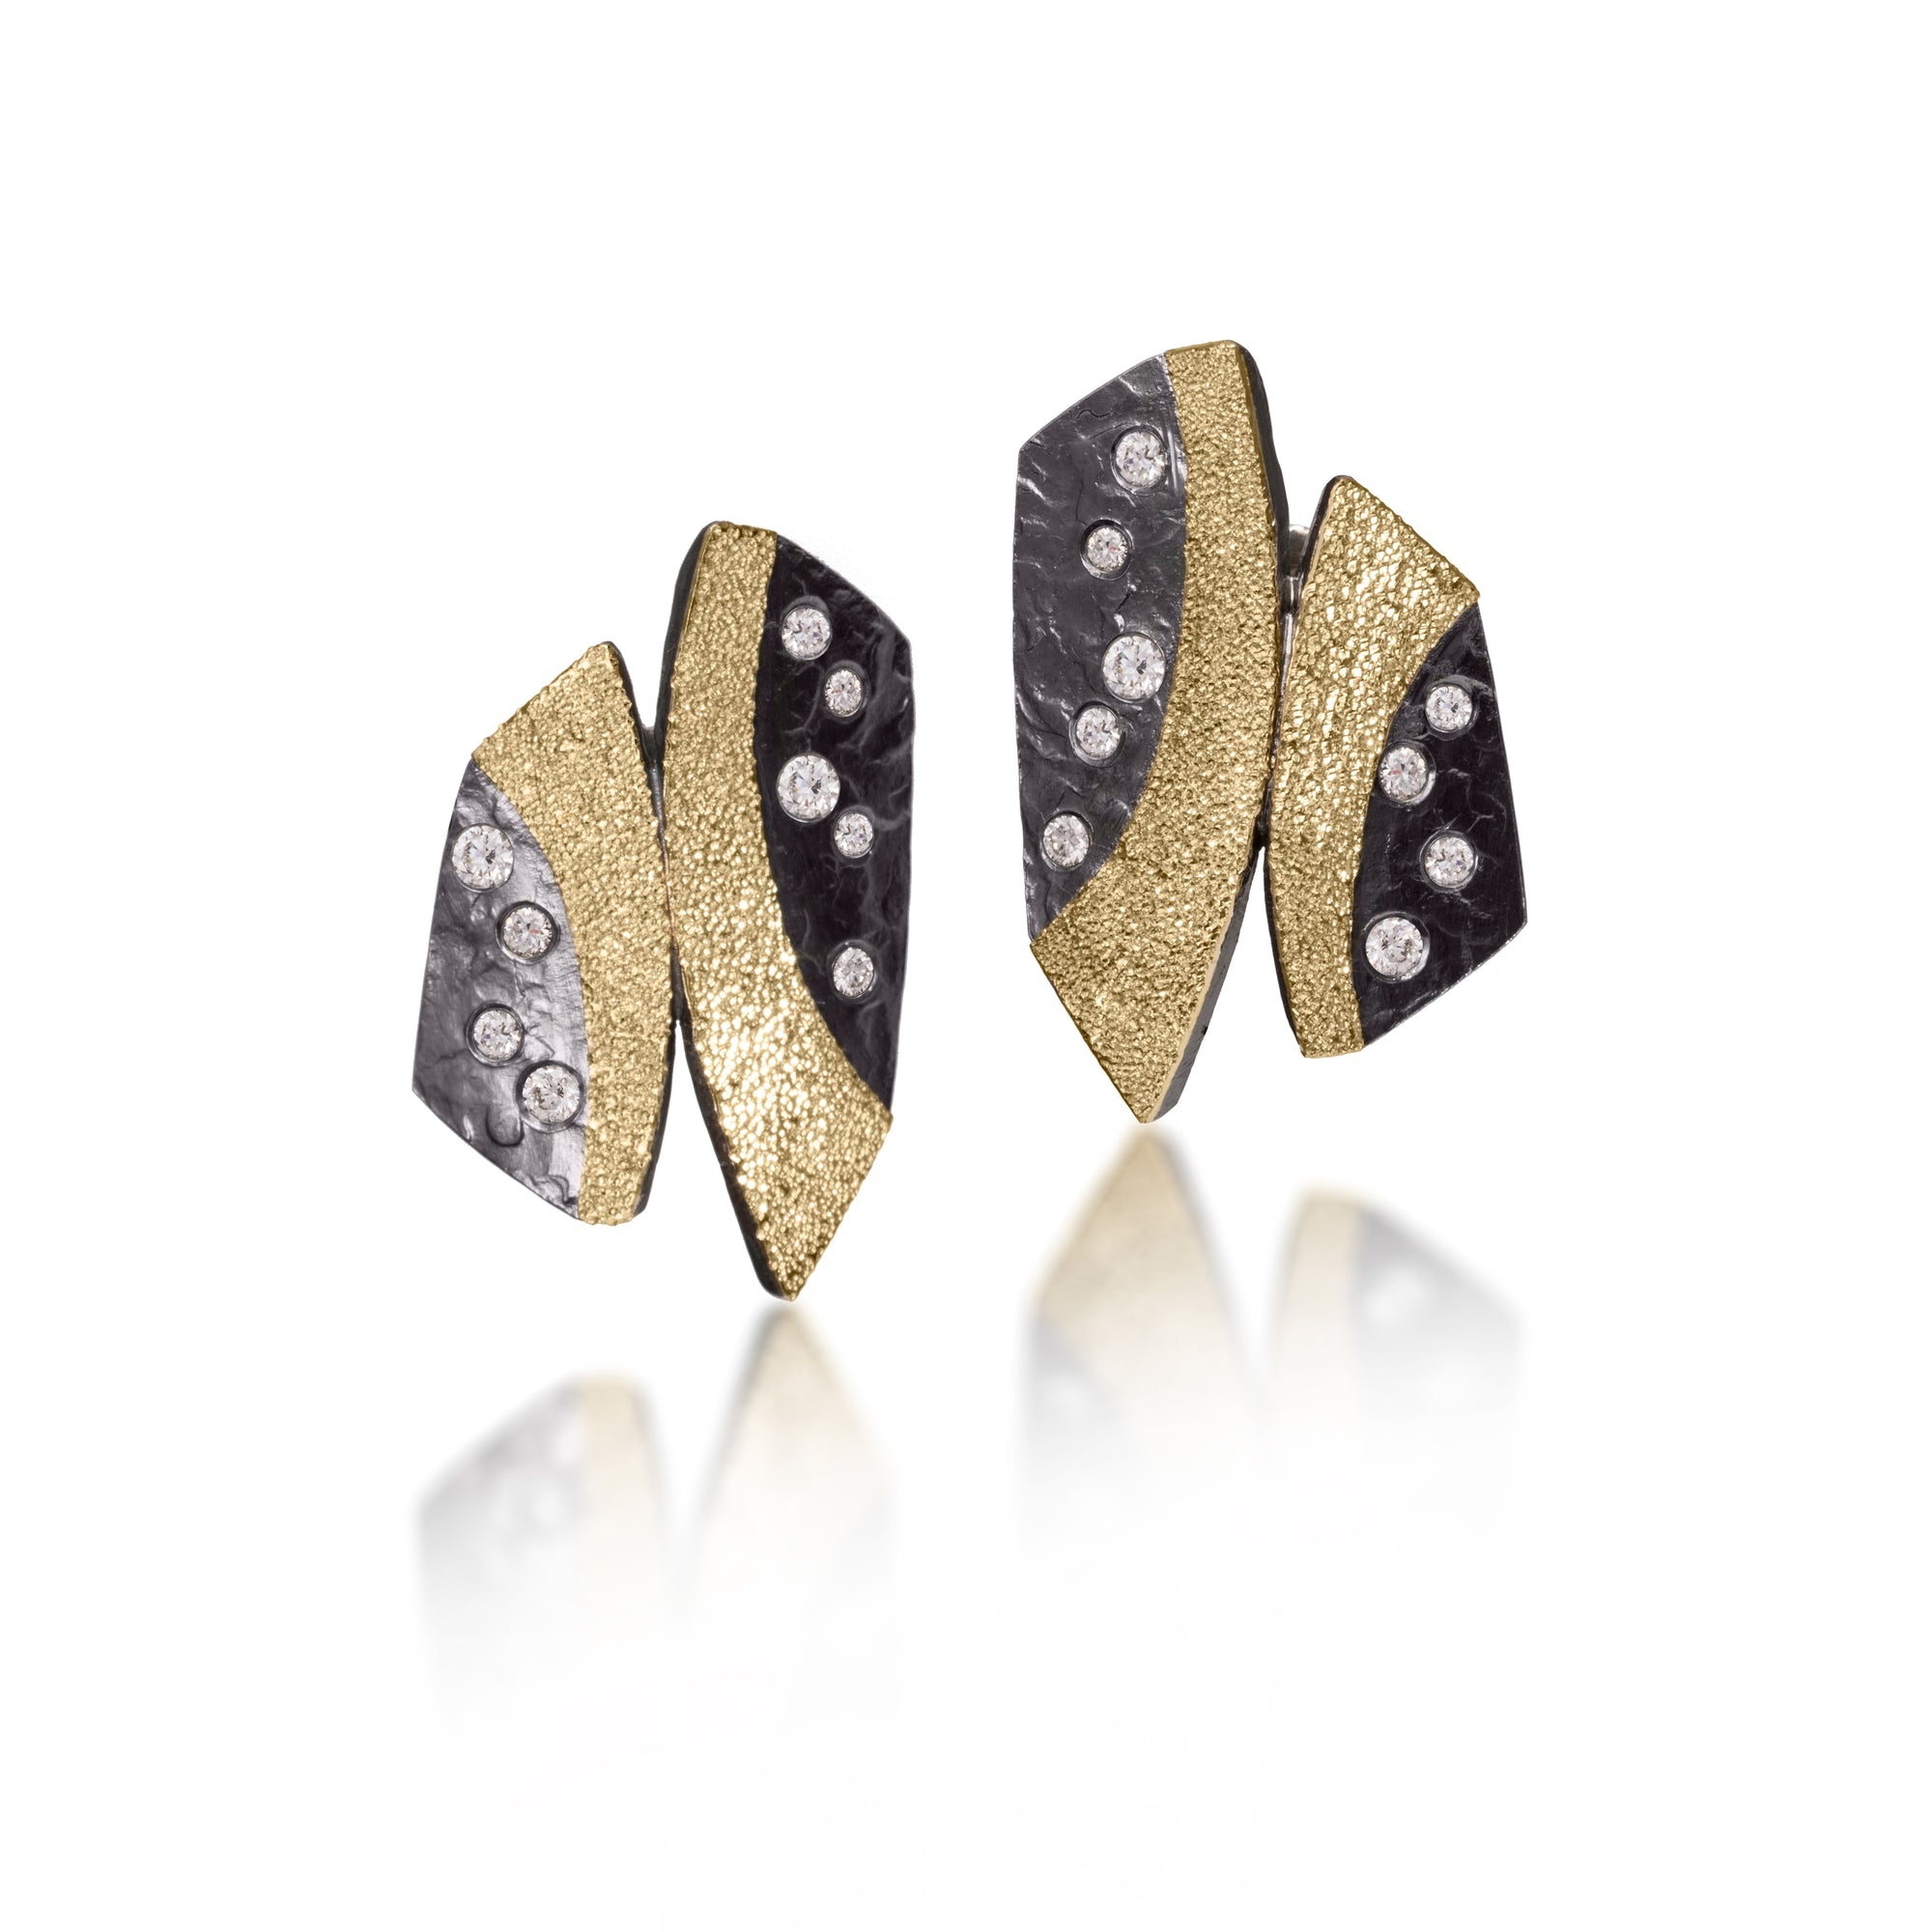 This Cyclone Earring in 18k gold and oxidized sterling silver is flush set with brilliant cut diamonds. Hand fabricated, hammer textured, diamond cut texture makes the gold shimmer. 0.41 tcw. 14k posts.